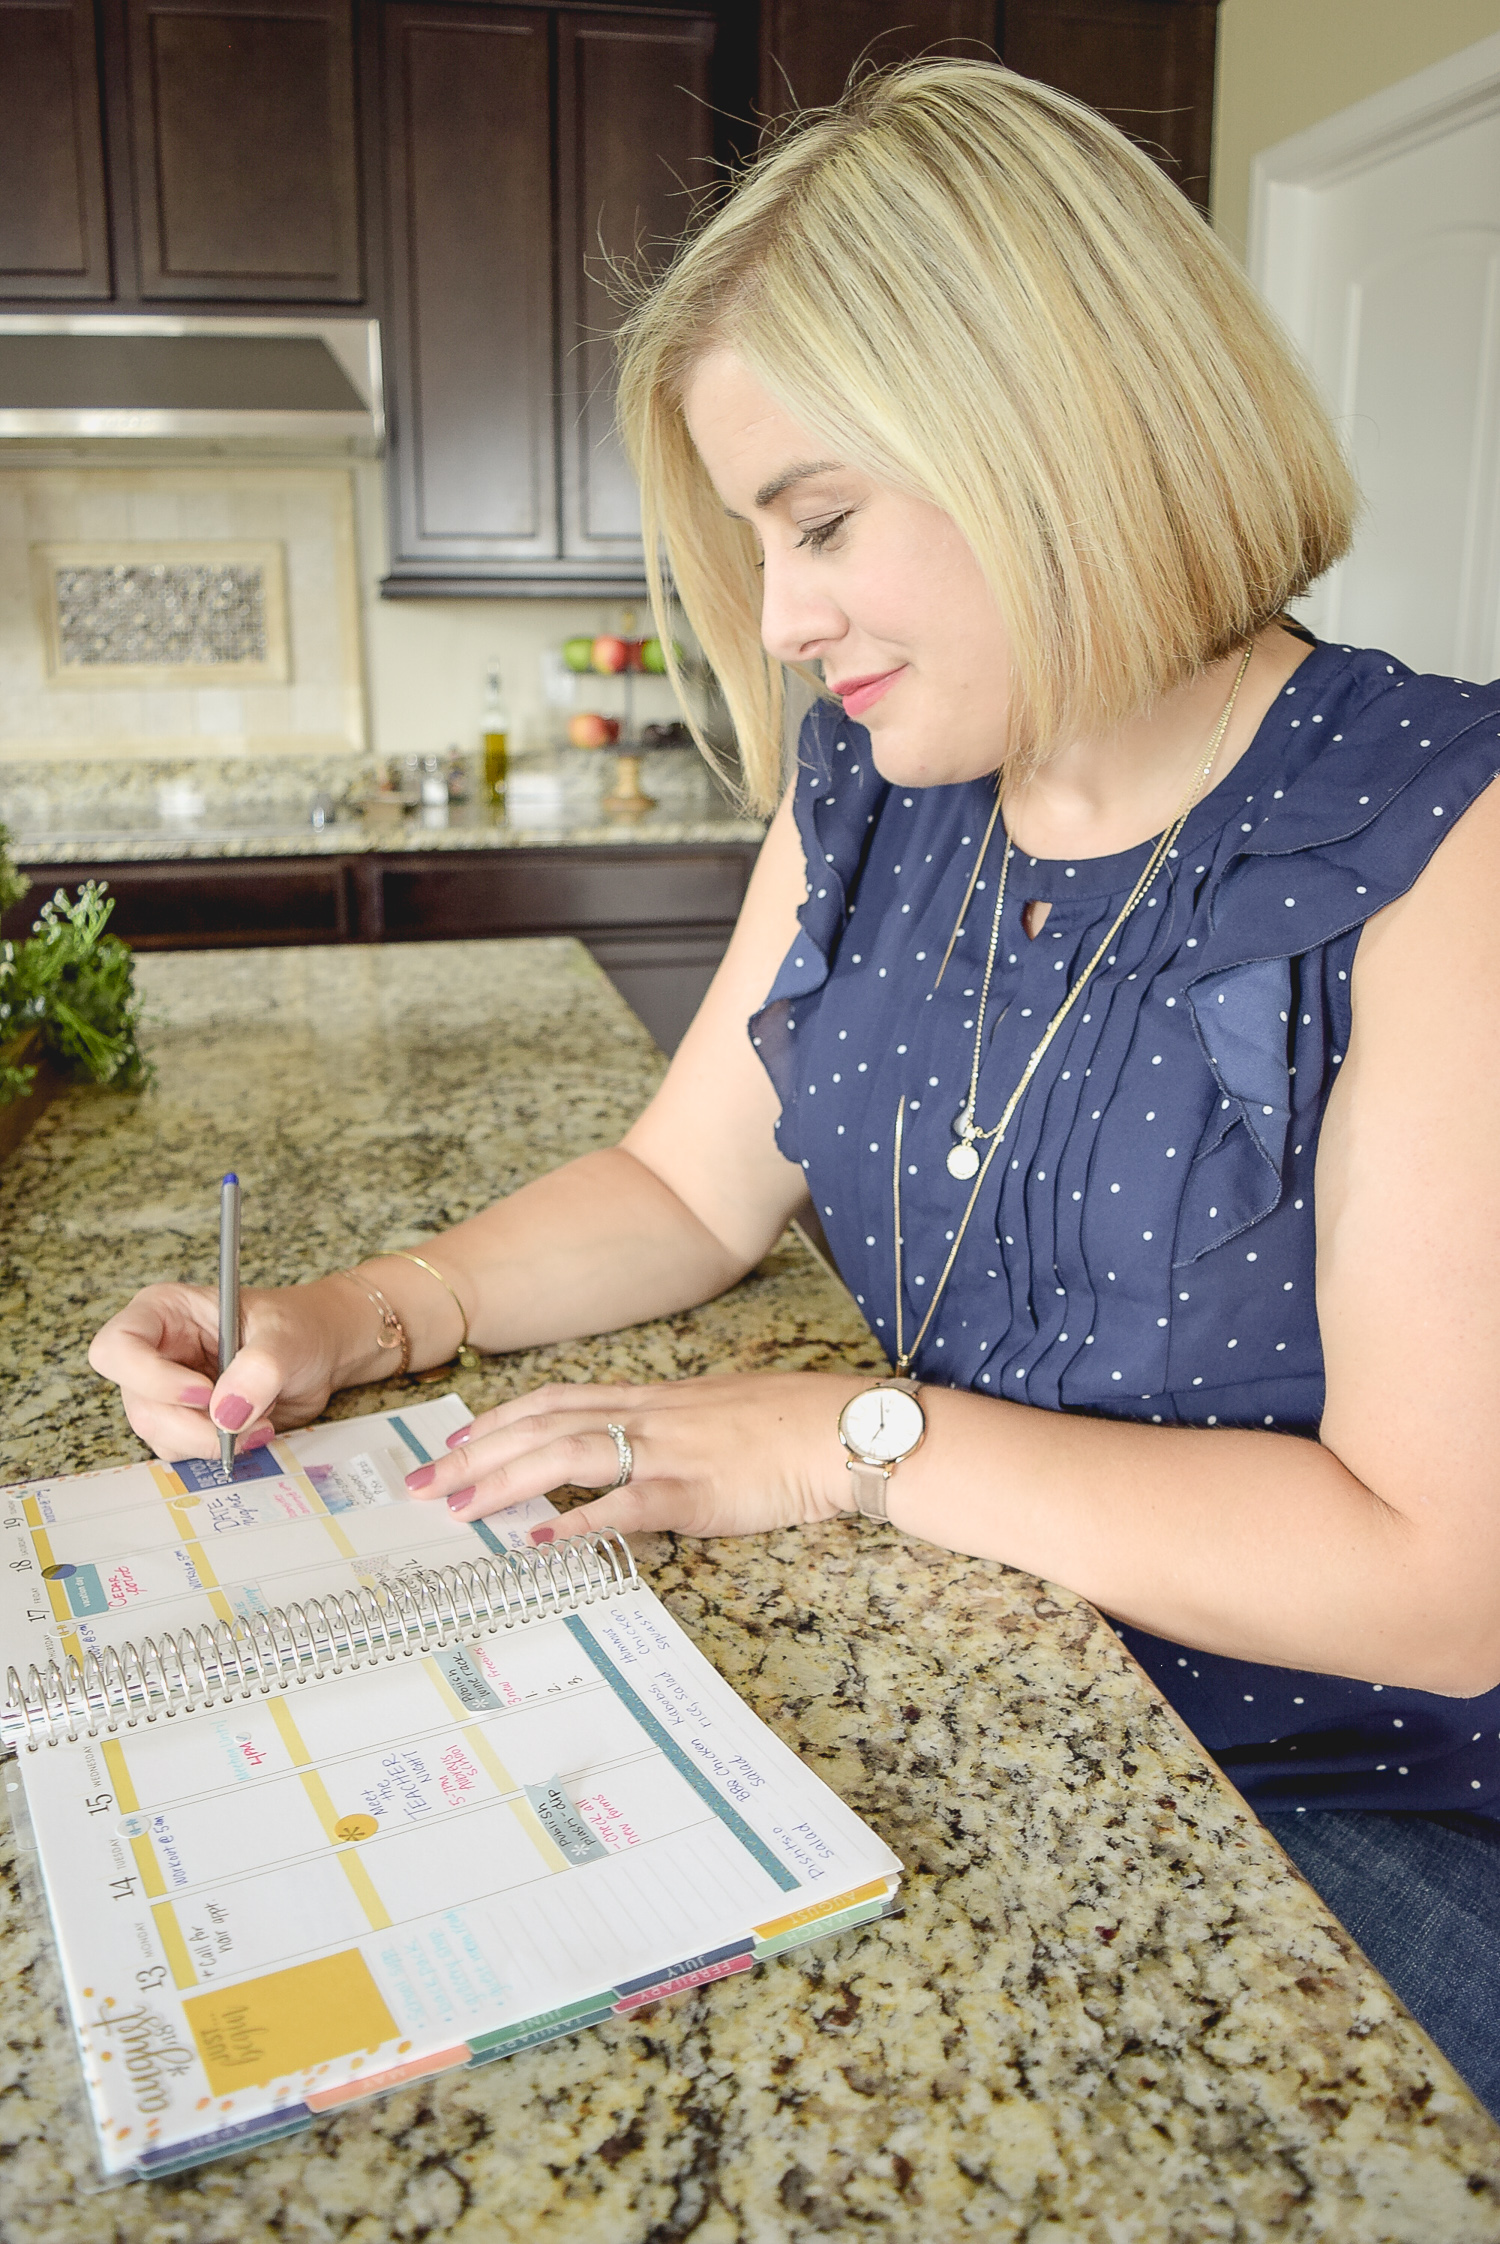 If you want to learn how to use a planner effectively, here are some tips from a planner pro Brittany!